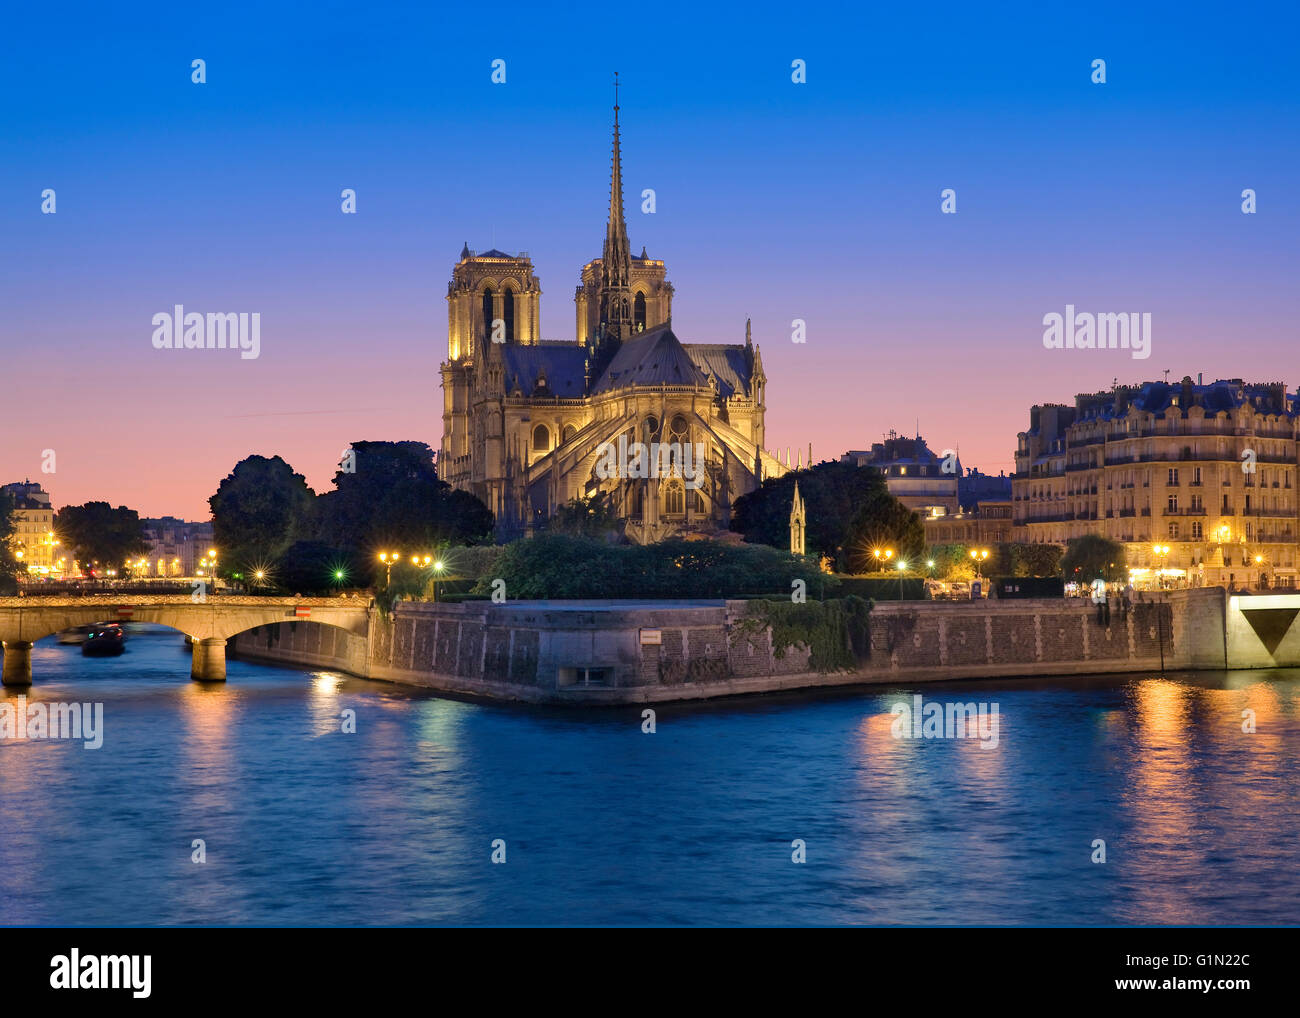 Notre Dame cathedral and Seine river at night Stock Photo